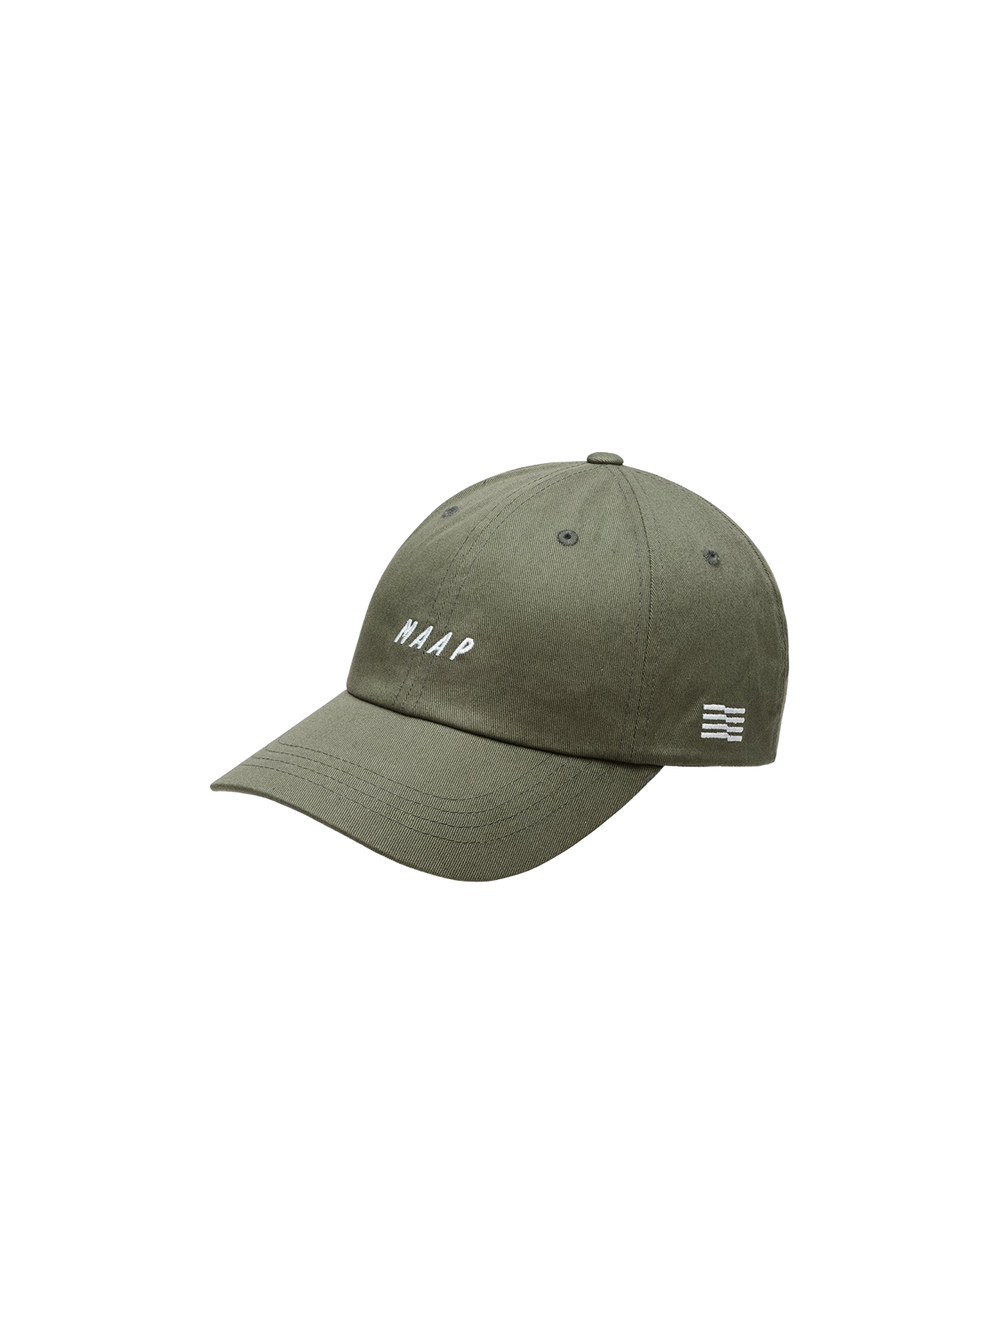 Product Image for MAAP Dad Cap